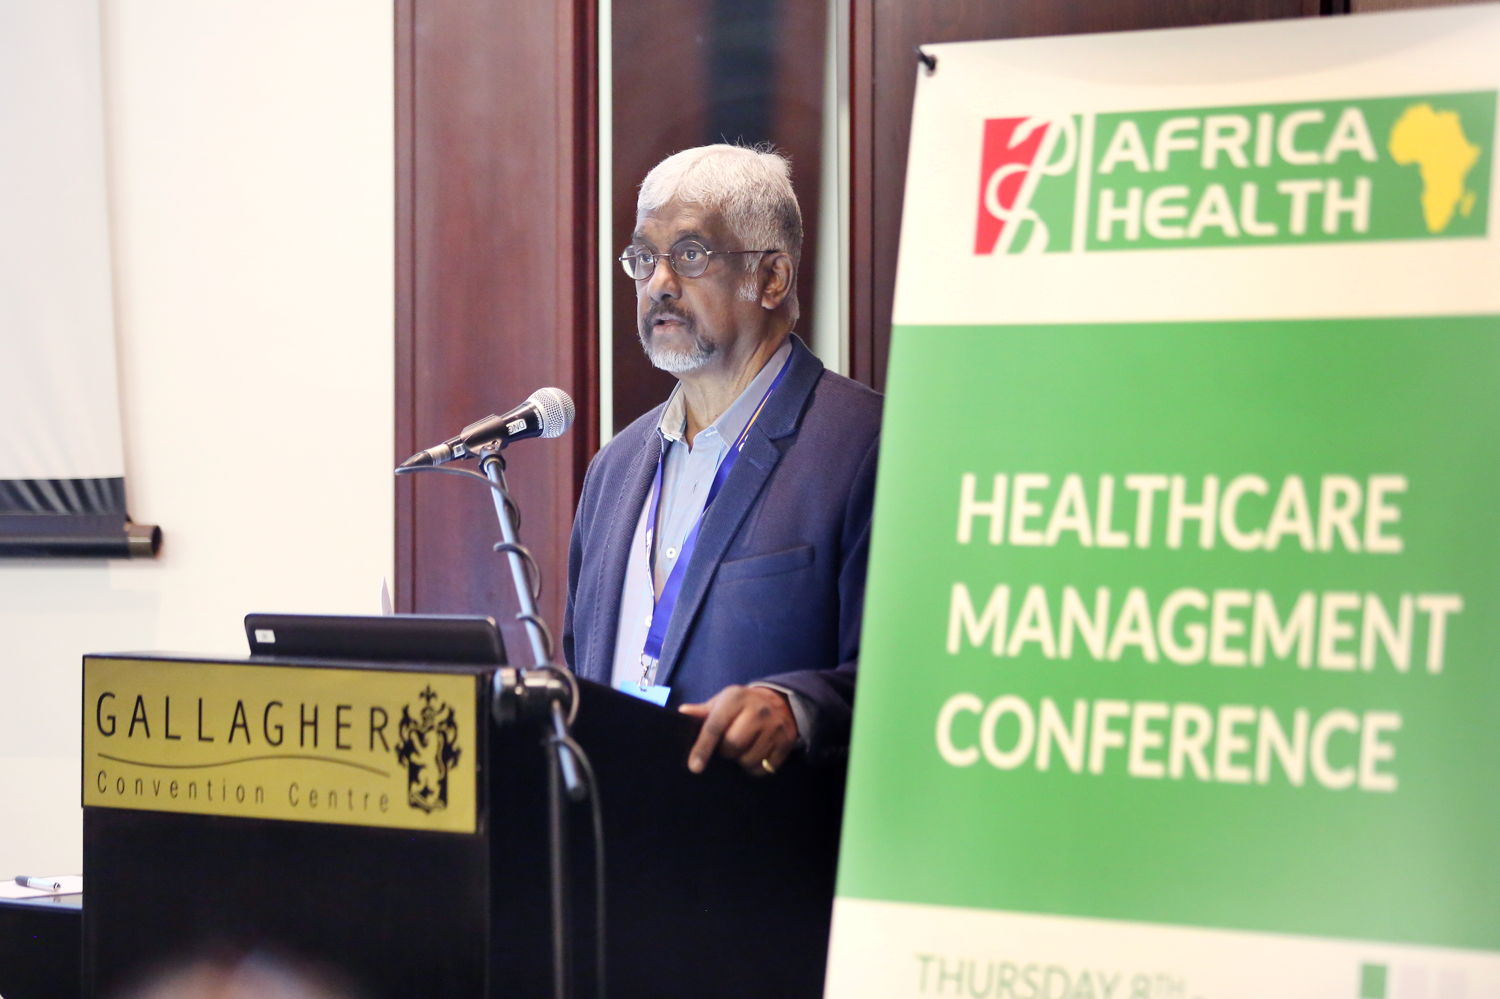 Prof Morgan Chetty, CEO of the KwaZulu-Natal Doctors Healthcare Coalition and Professor of Managed Care and Health Services Management at the University of KwaZulu-Natal.